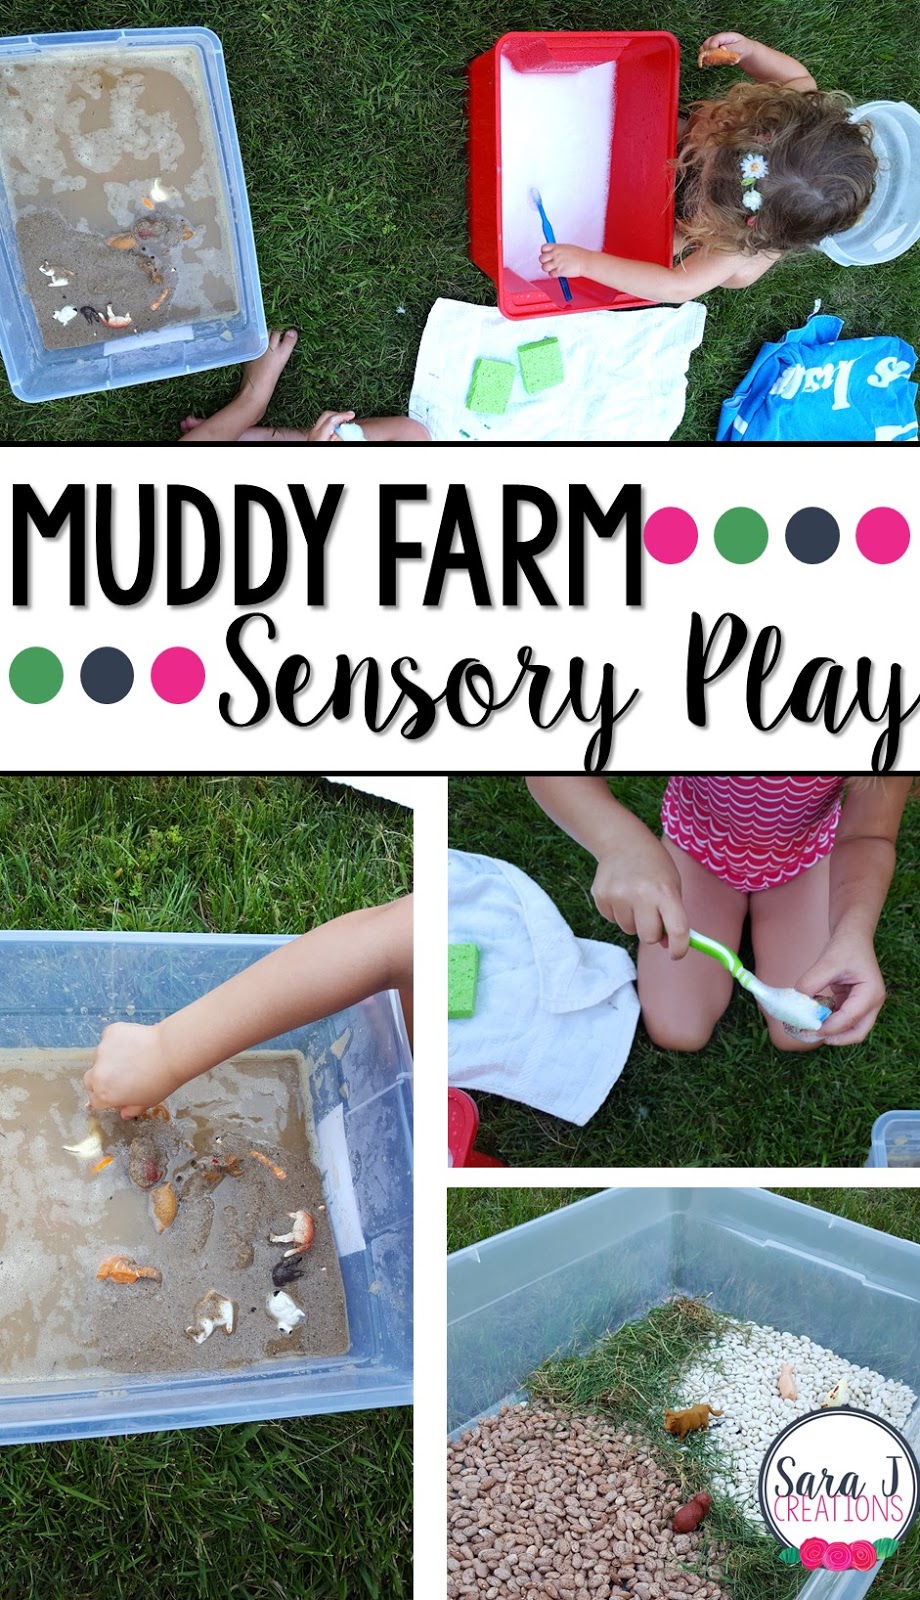 Muddy Farm Sensory Play is perfect for toddlers and preschoolers to practice cleaning muddy farm animals.